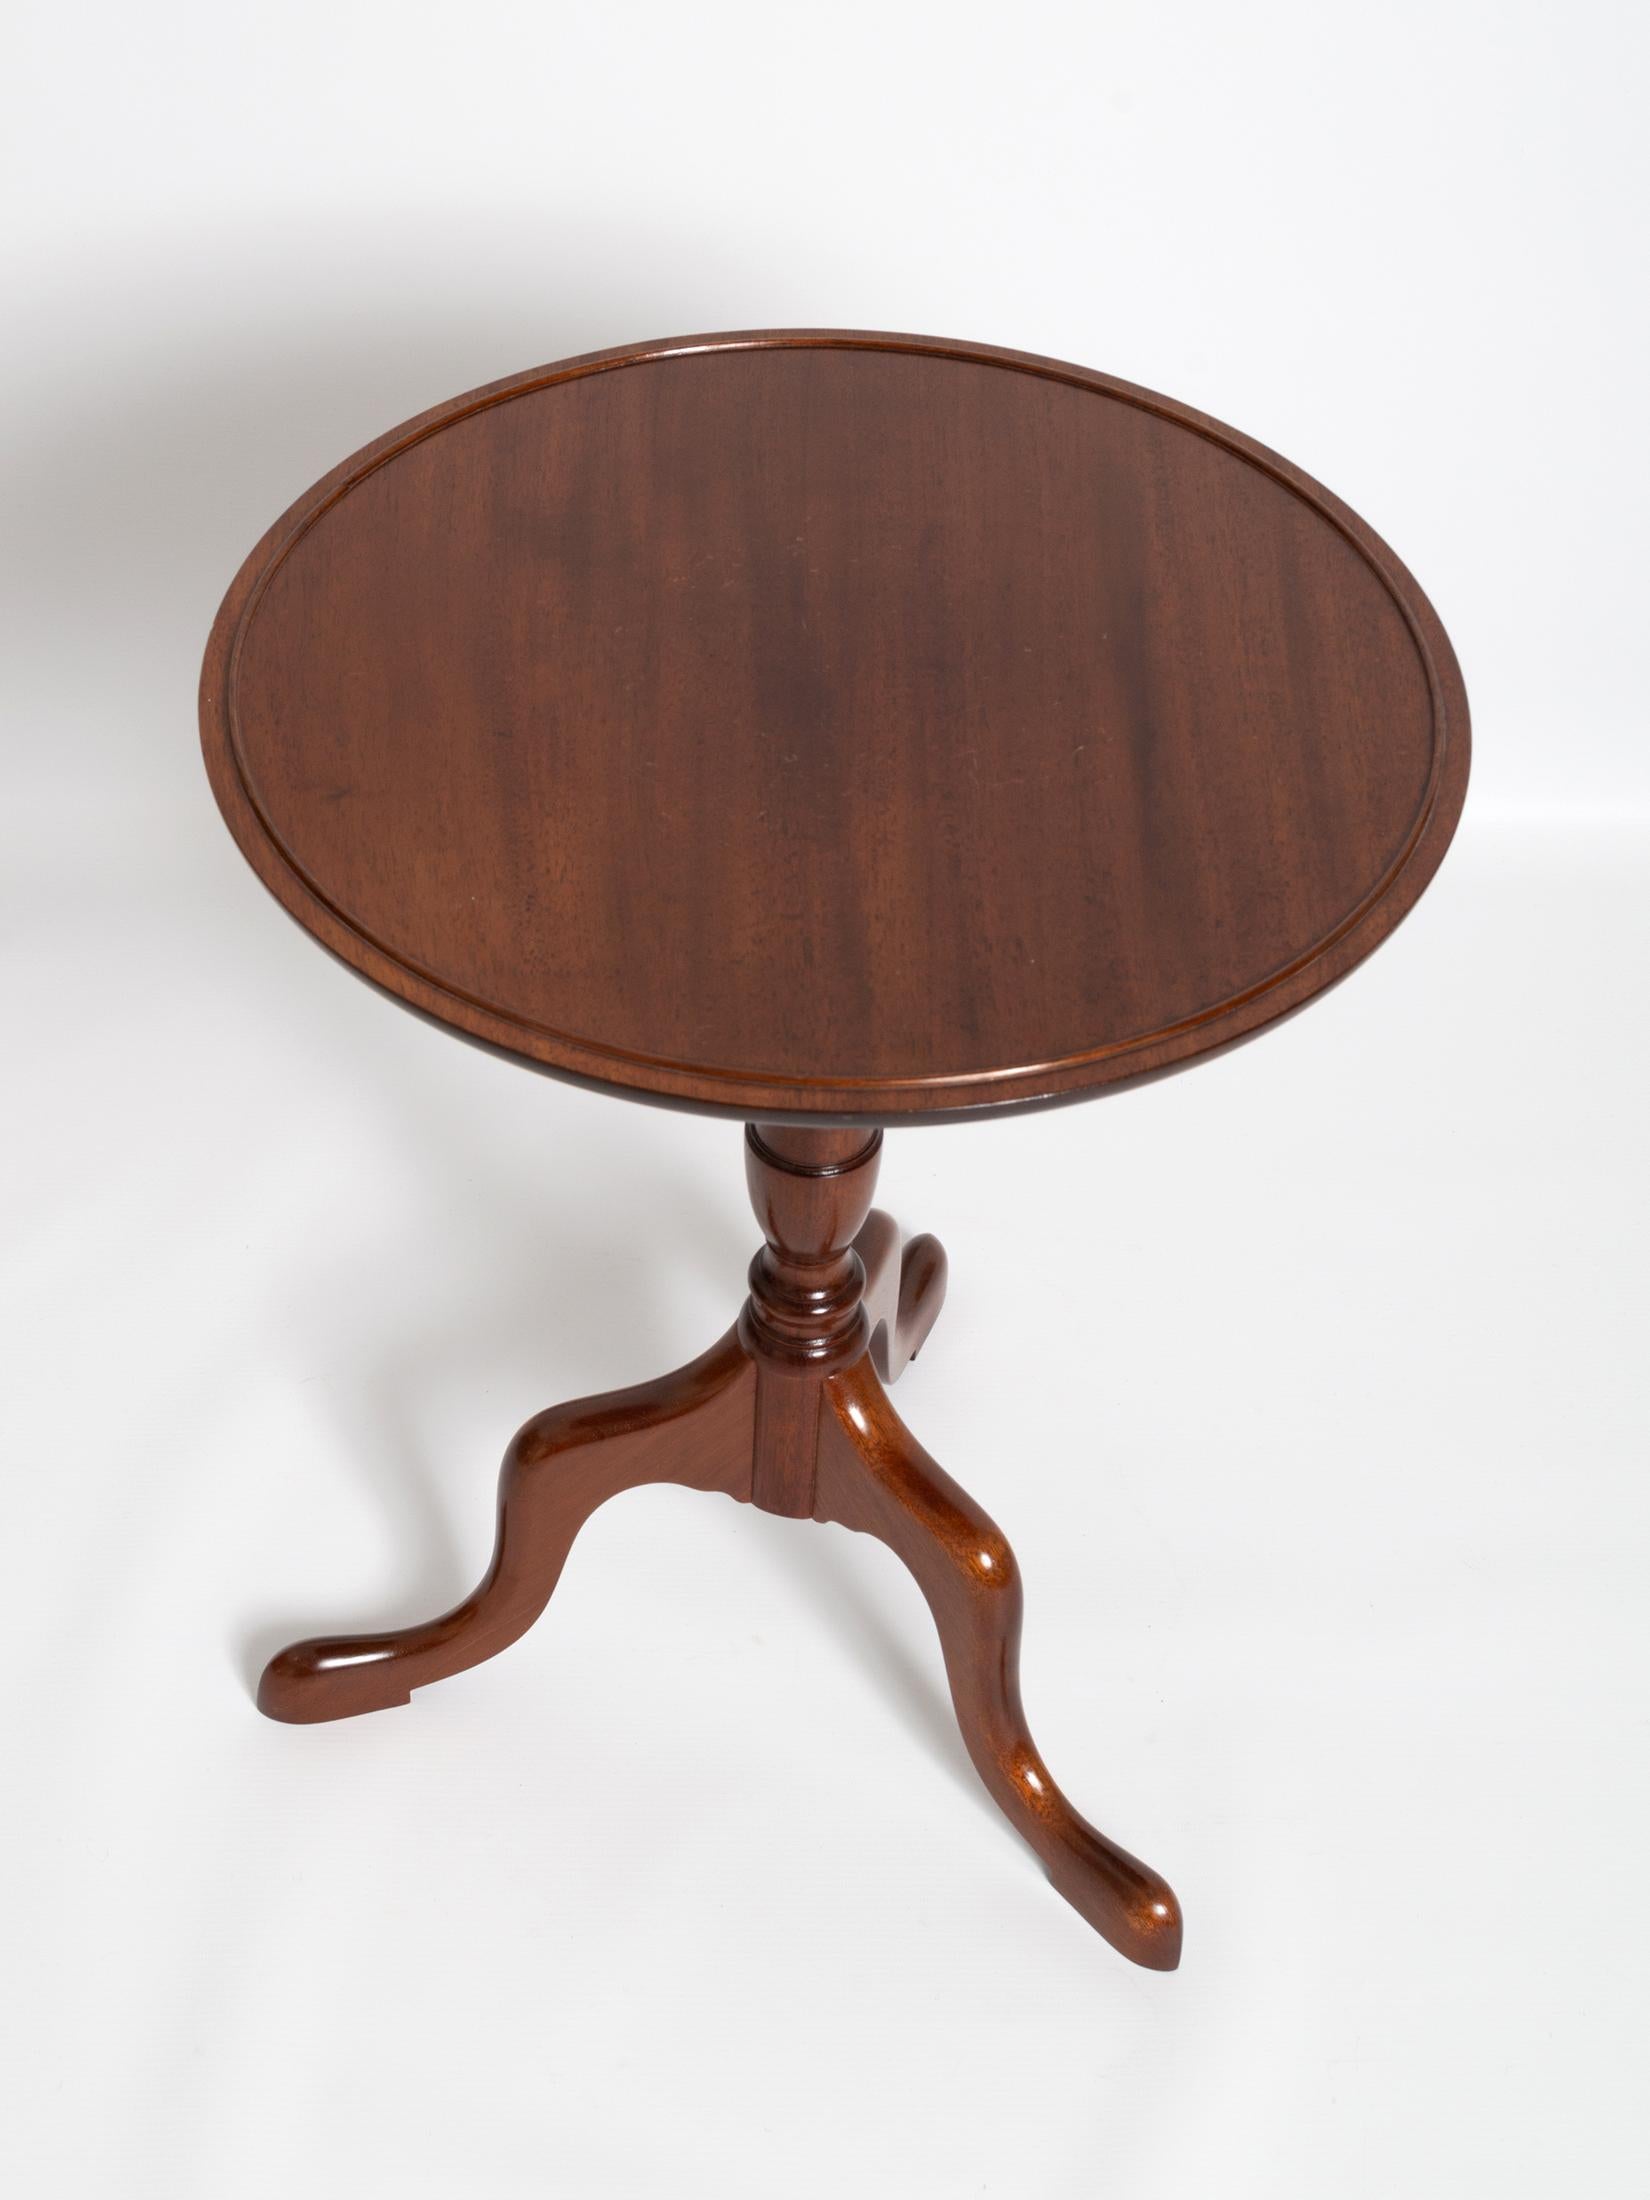 20th Century Antique Georgian Style Mahogany Tripod Side Table by Redman & Hales, England